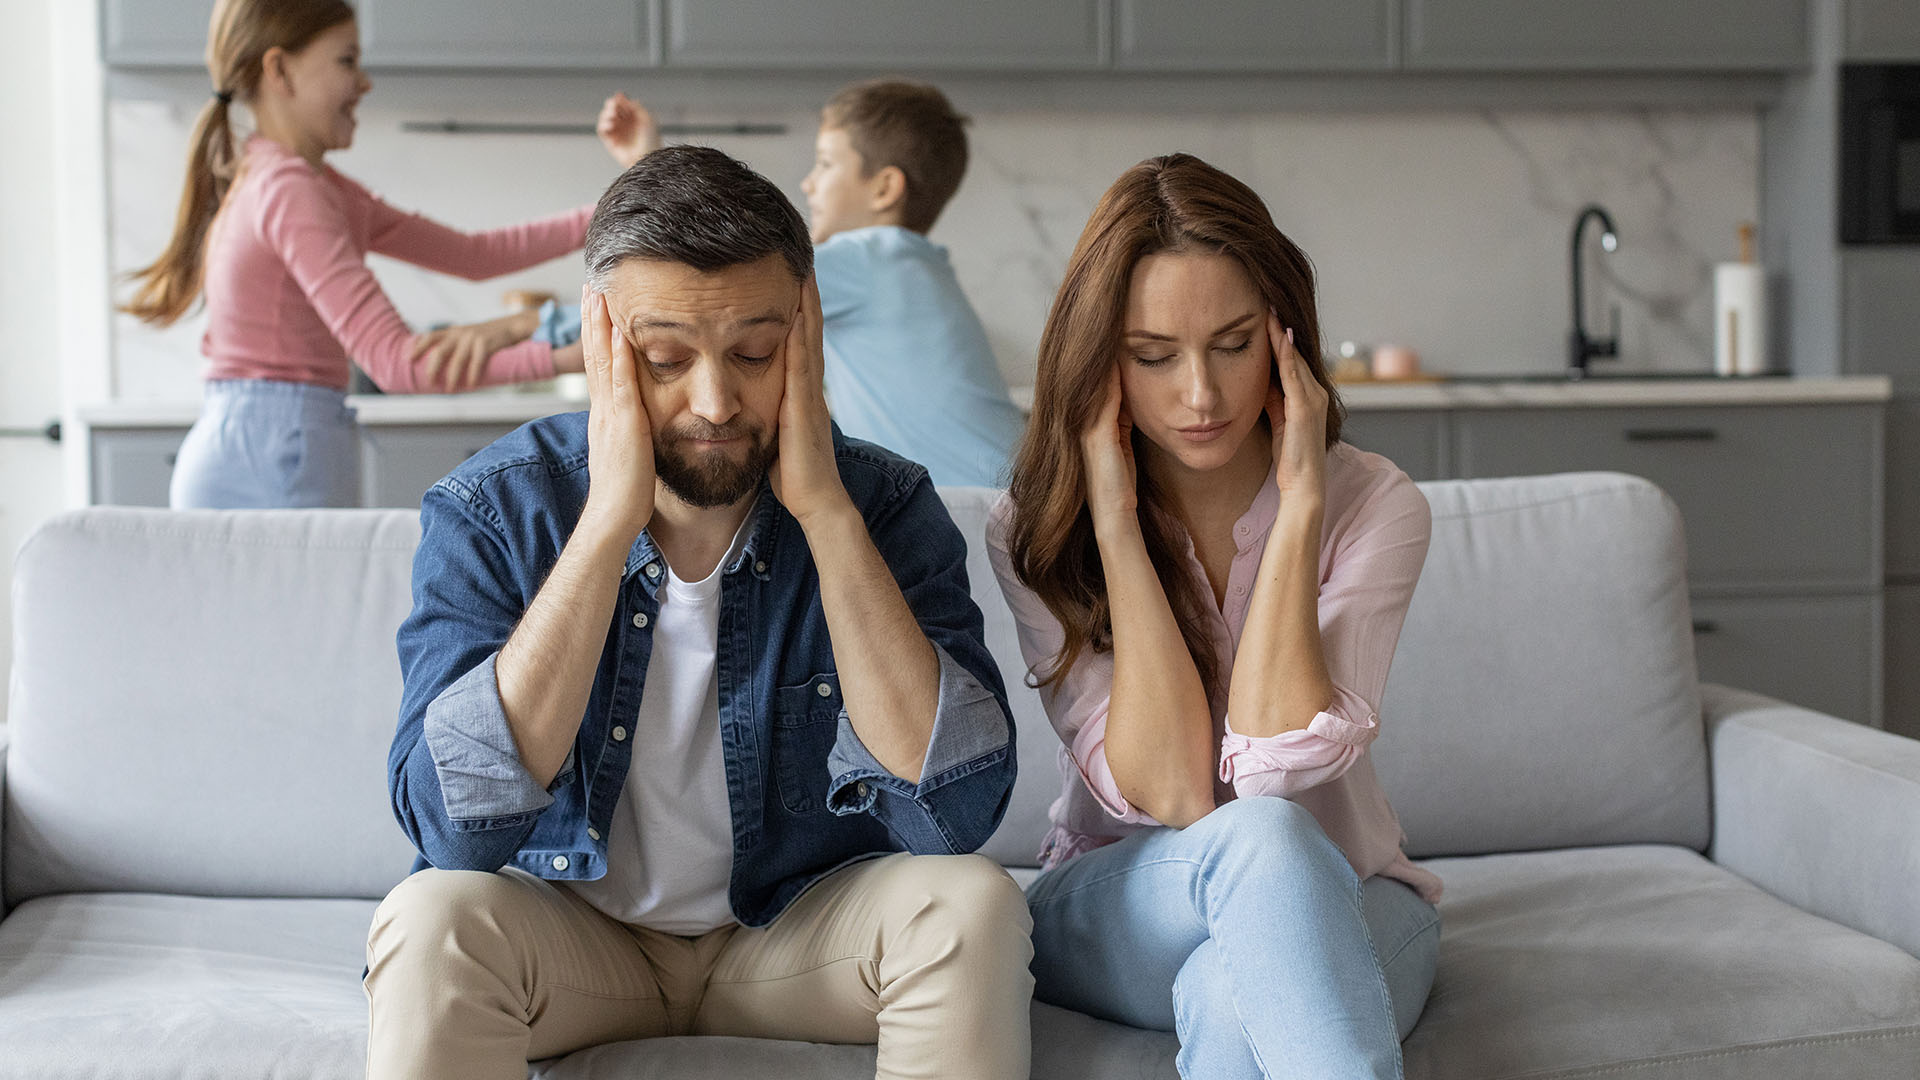 A man and woman sit on a couch, covering their ears, while two children play energetically in the kitchen in the background. They ponder, "Is renting ruining our future?